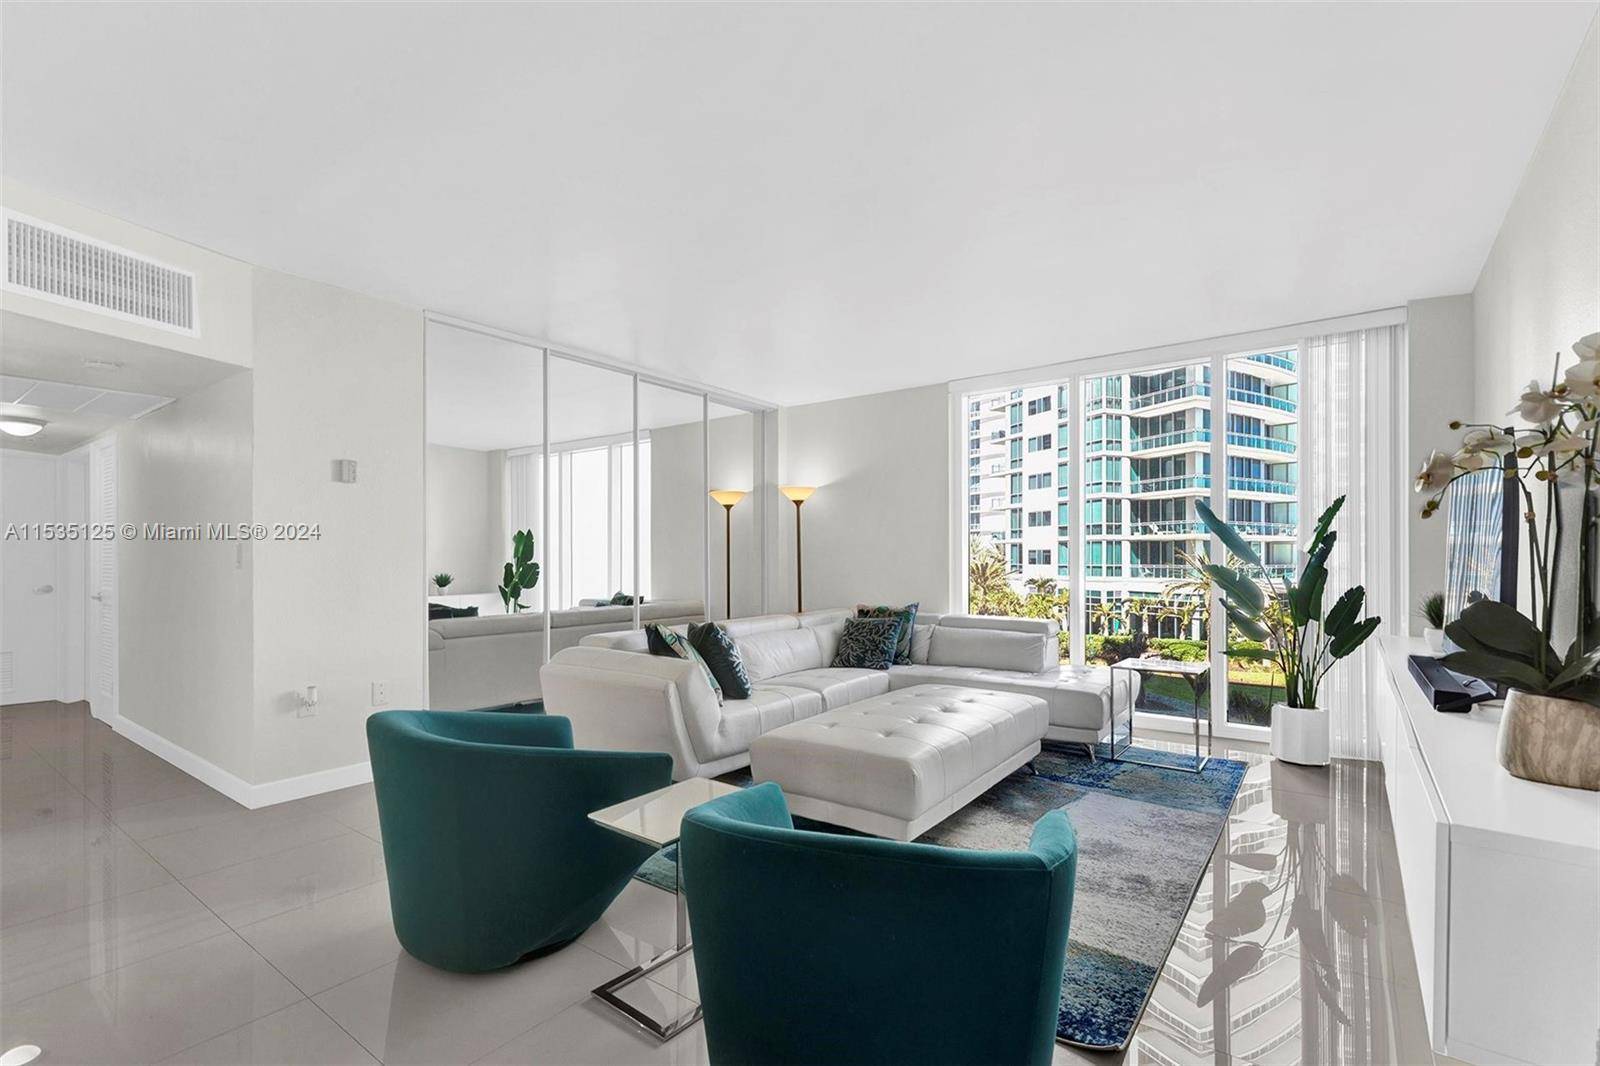 BAL HARBOUR OCEANFRONT FABULOUS FURNISHED 2 BEDS 2 BATHS WITH GARDEN AND OCEAN VIEWS PORCELAIN TILES THROUGHOUT THE LIVING AREAS THE NEW HARBOUR HOUSE TAKES LIVING TO A NEW LEVEL ...